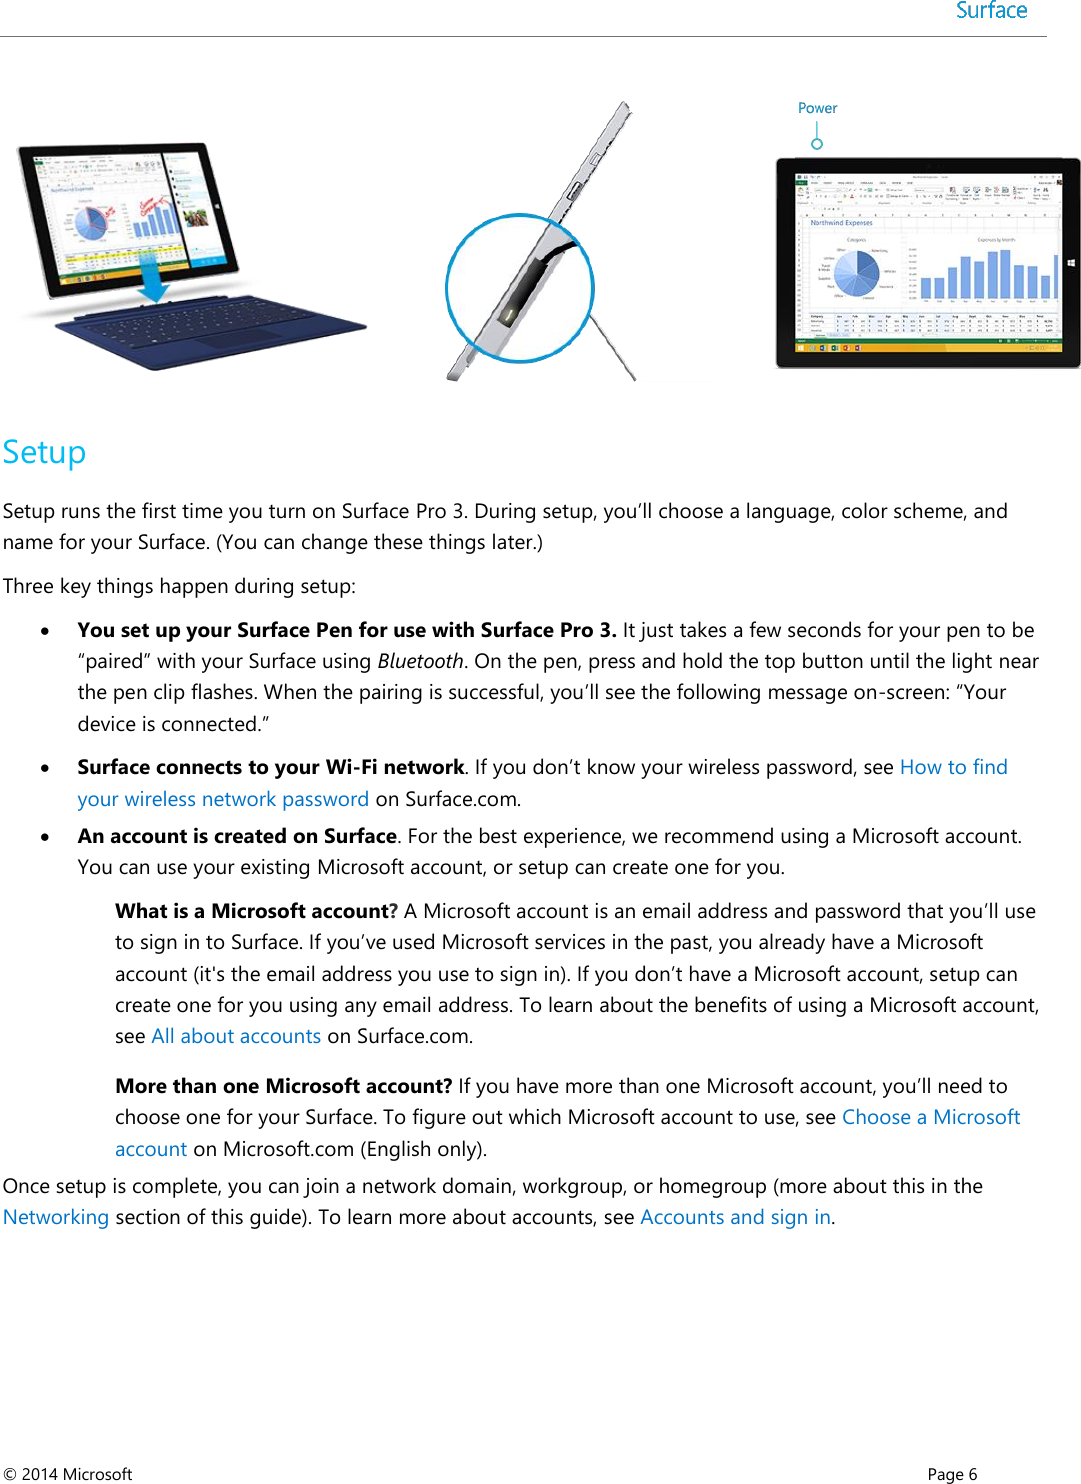 surface pro 3 user guide